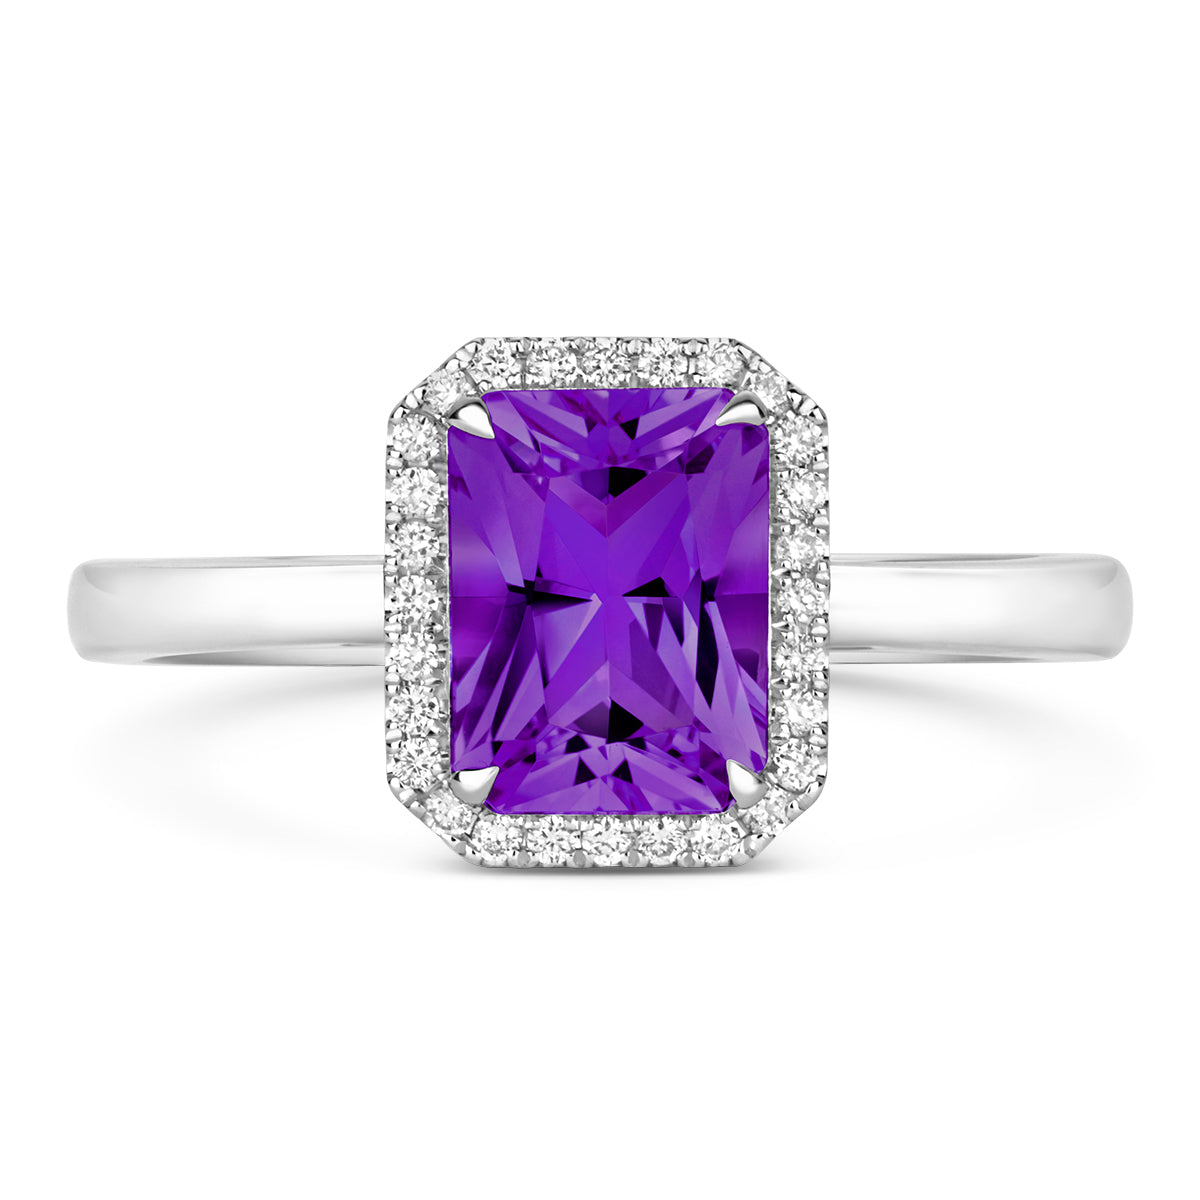 18ct White Gold Emerald Cut Amethyst and Diamond Ring